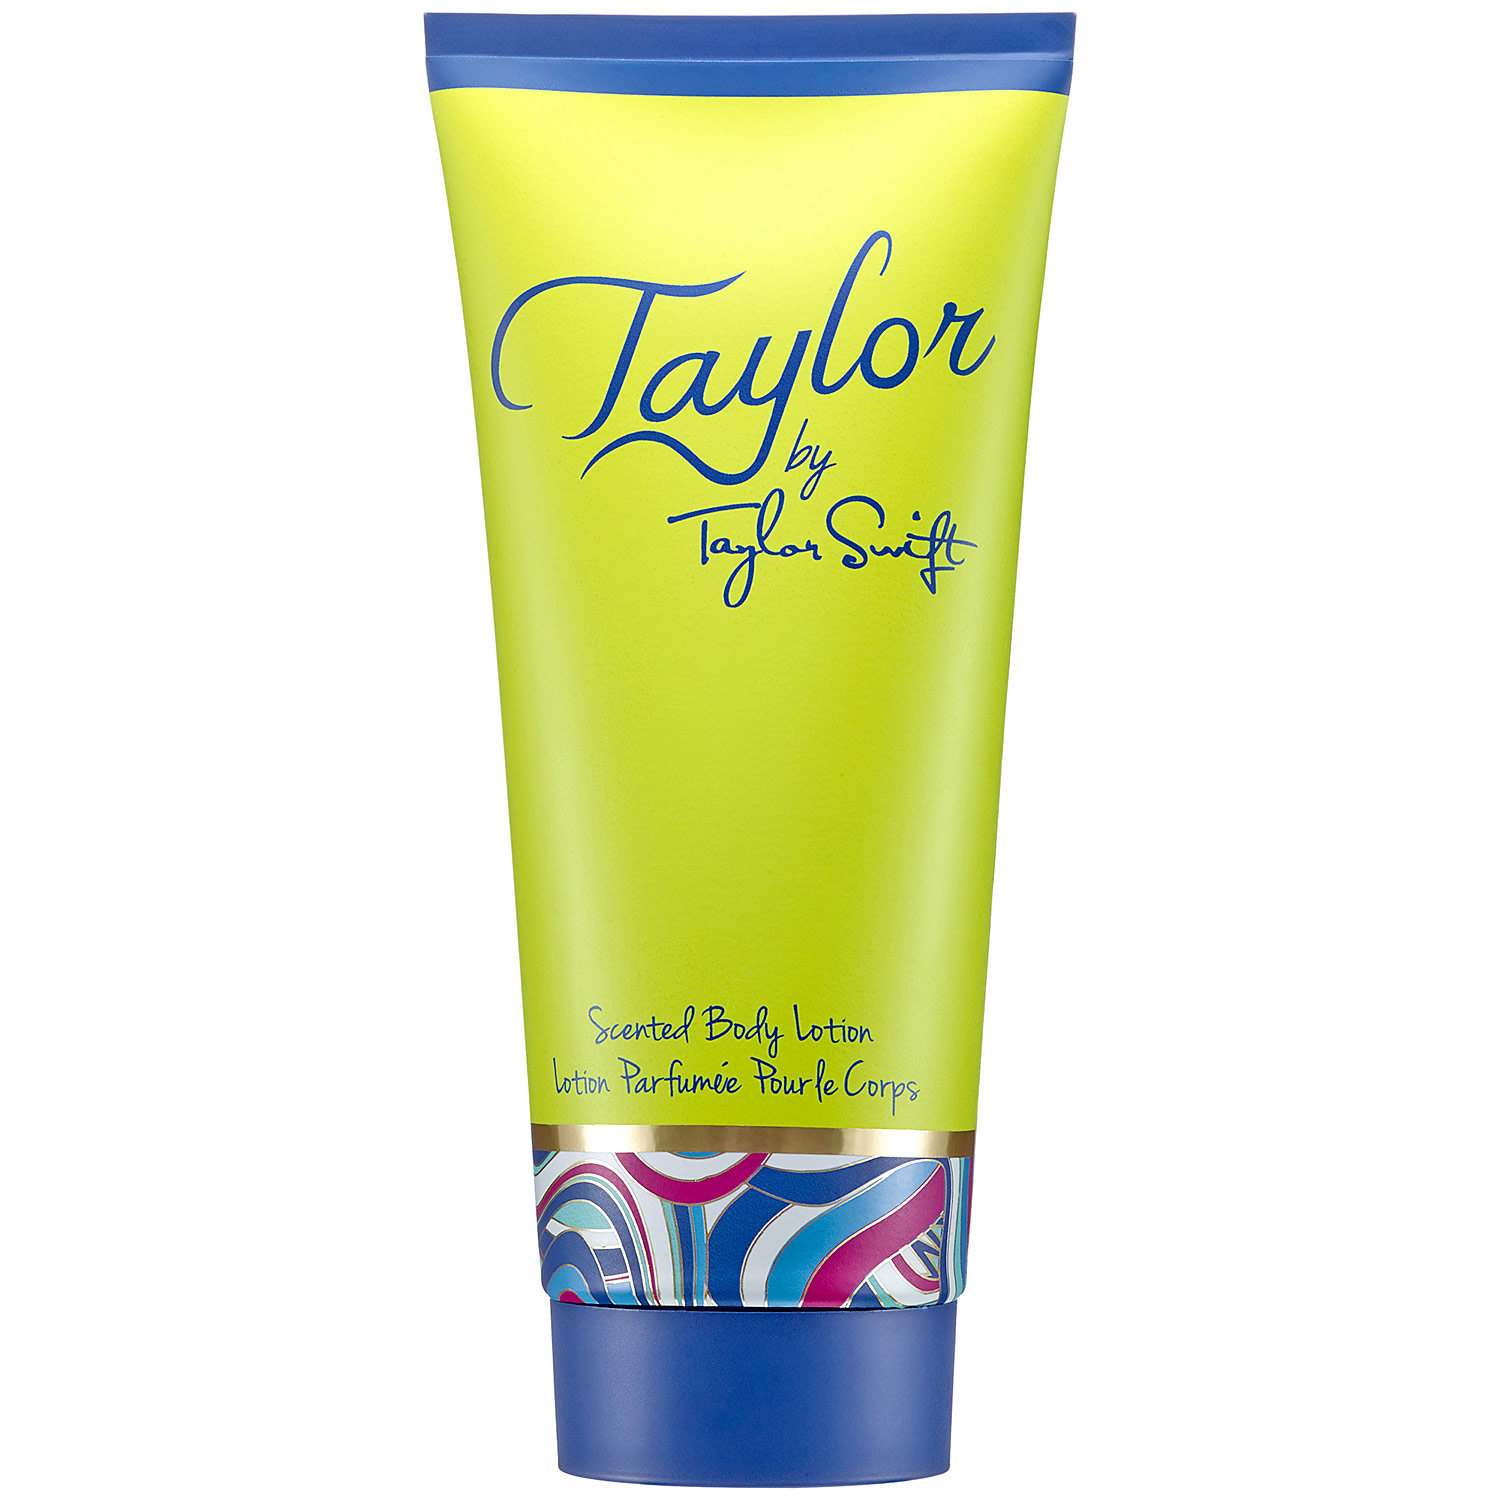 Taylor By Taylor Swift Body lotion